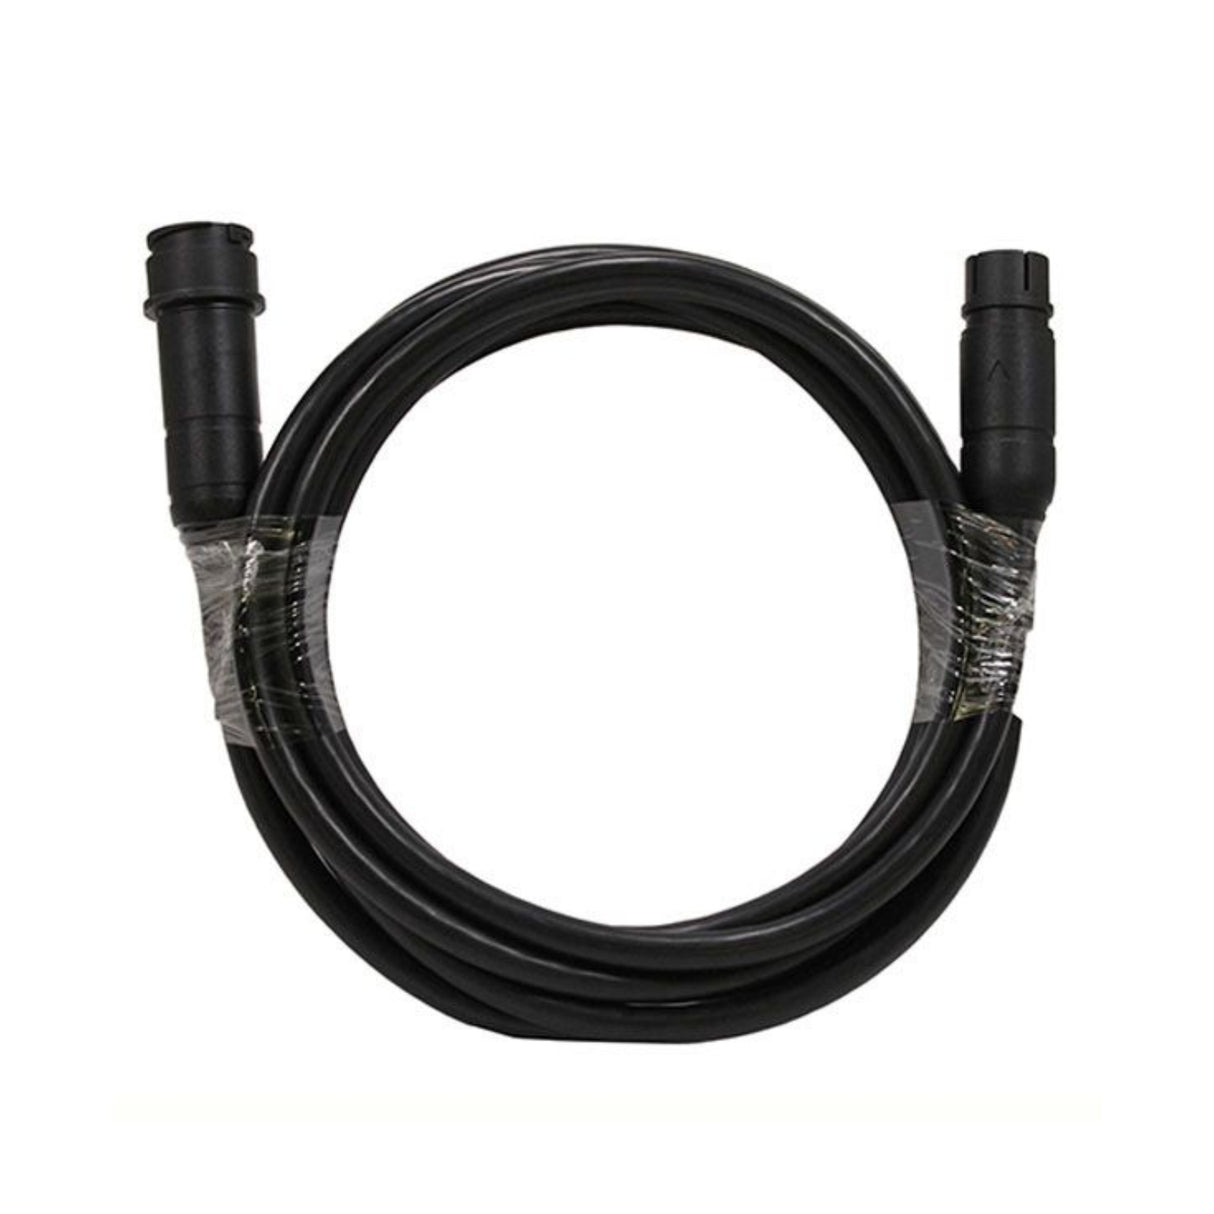 Raymarine RealVision 3D Transducer Extension Cable - 3m - PROTEUS MARINE STORE